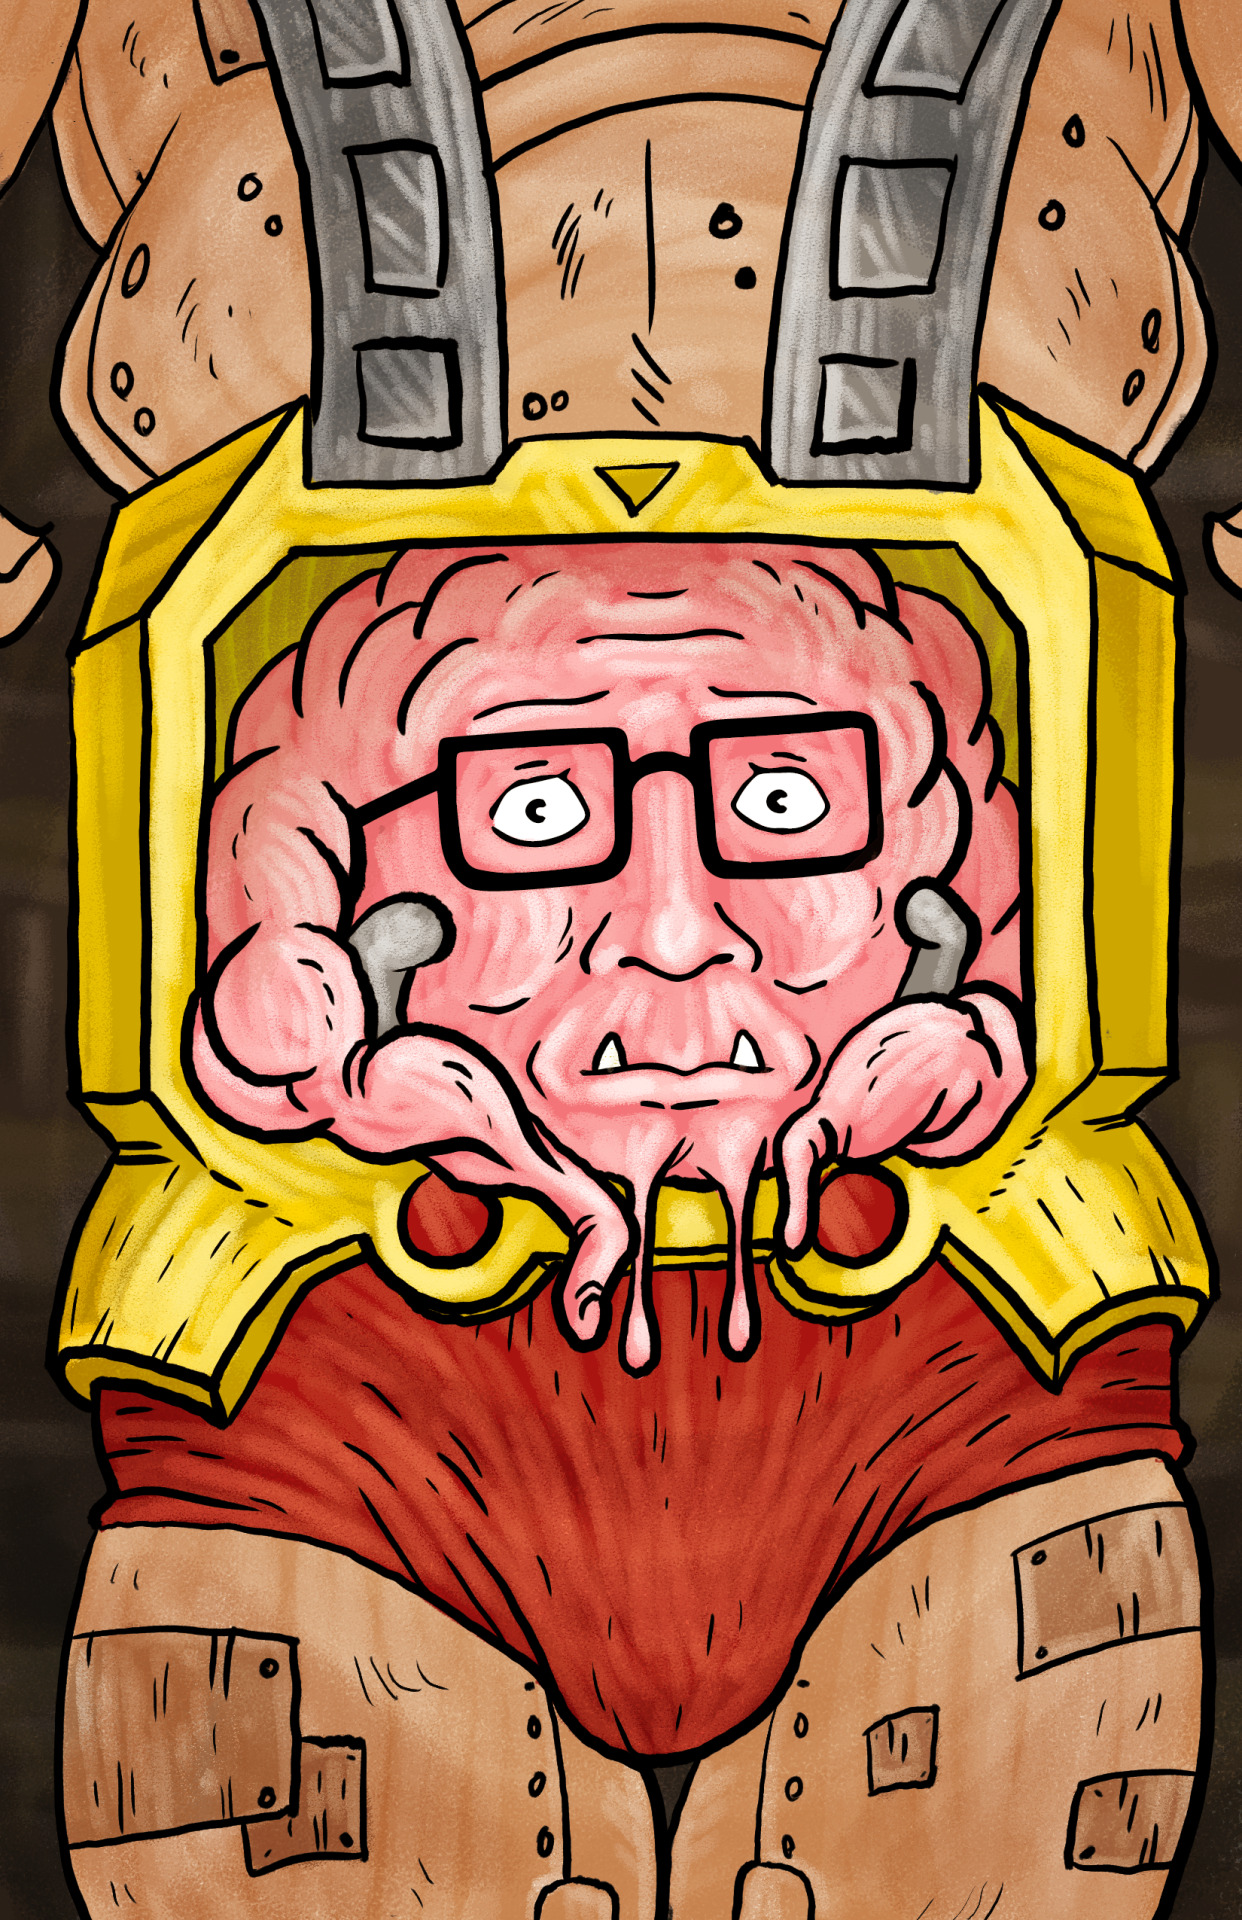 stablercake:
“Krang of the Hill - for the Blank Hill zine, I’m sure it’s been done but I wanted to try a different way of shading, I screwed it up so far but maybe I can figure it out eventually?
”
New BLANK HILL ZINE submission by Mallory Hodgkin...